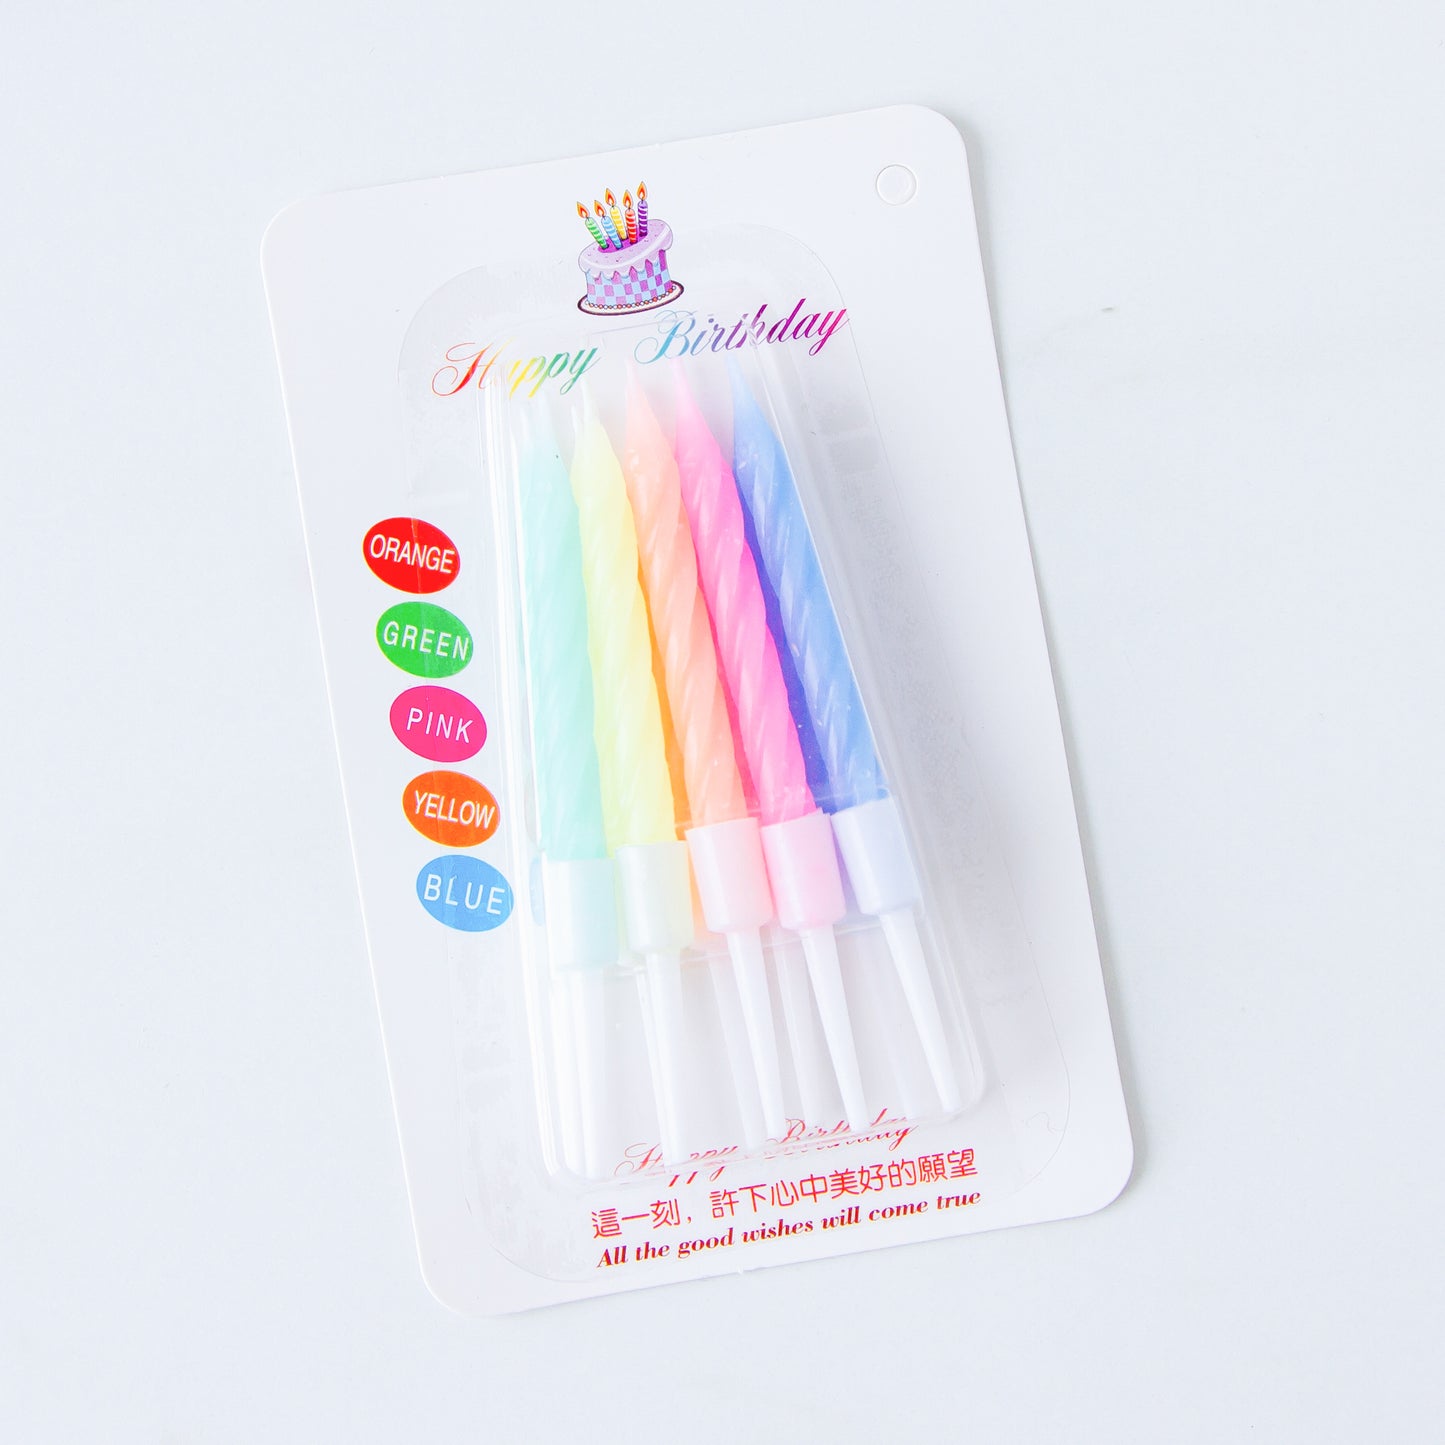 Small Rainbow Candles 10 pcs  | $2.00 Only